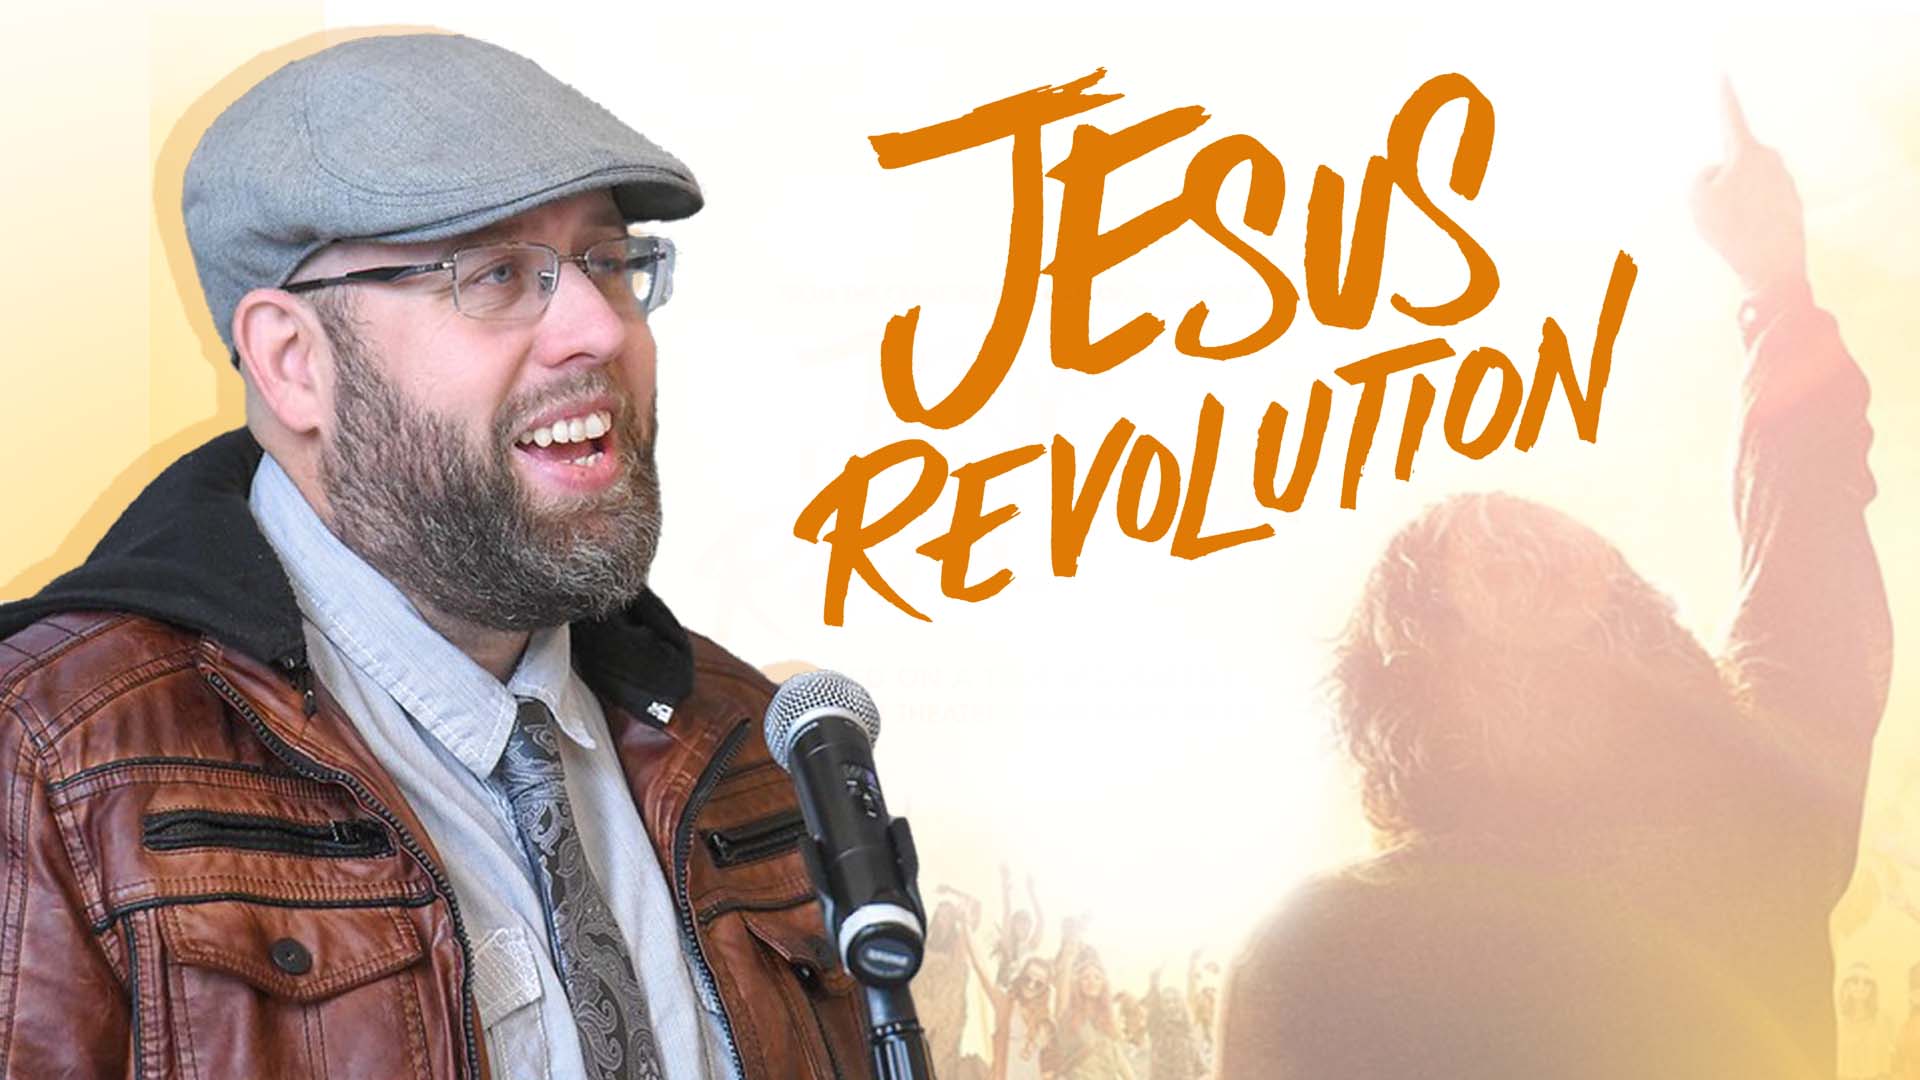 The Wally Show Interviews Producer Andy Irwin About the New Movie "Jesus Revolution"